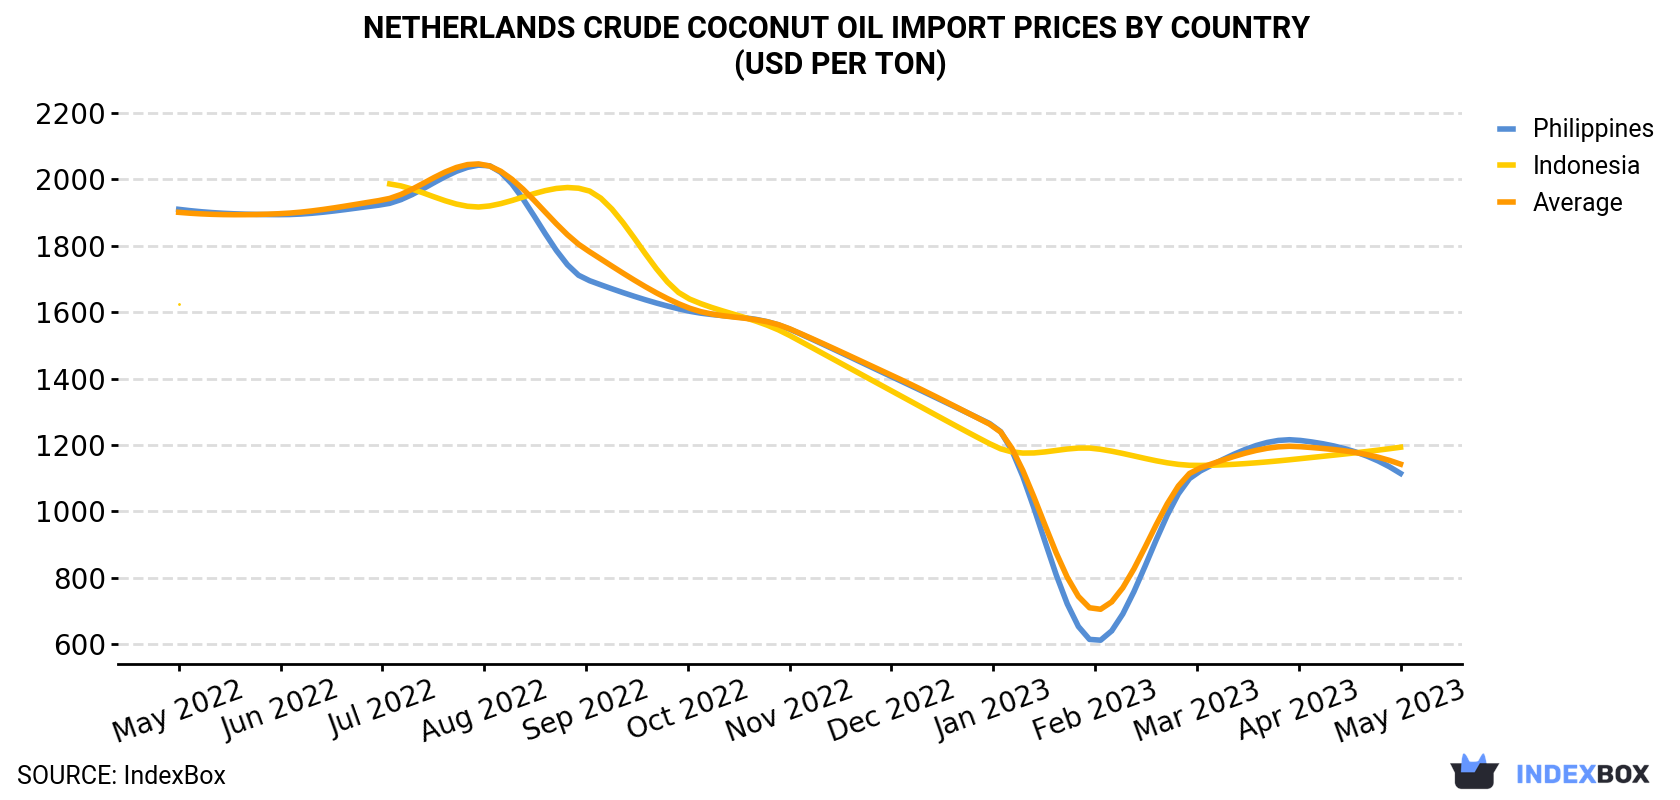 Netherlands Crude Coconut Oil Import Prices By Country (USD Per Ton)